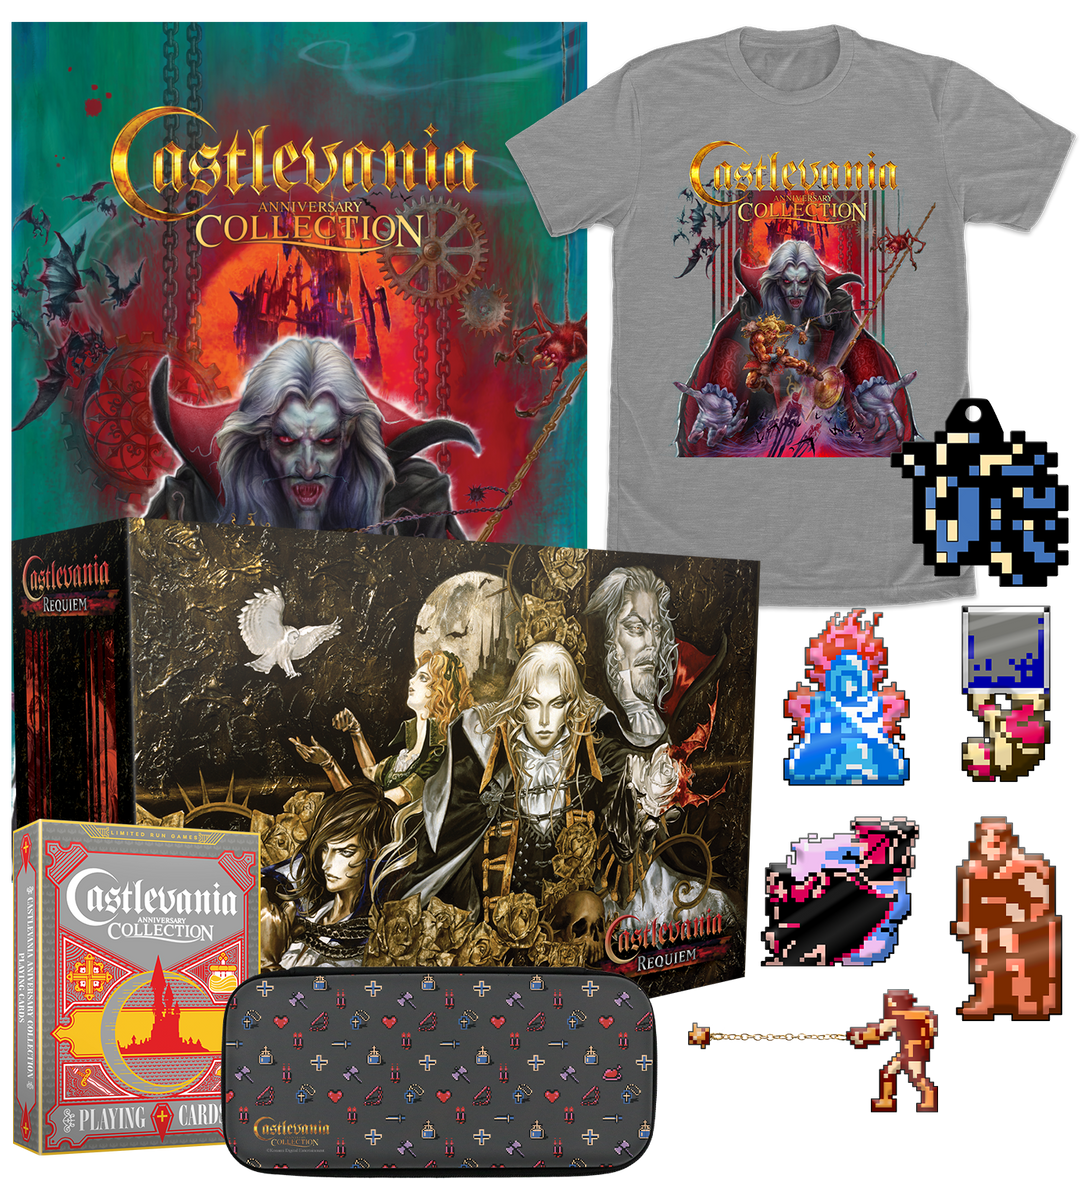 CASTLEVANIA ANNIVERSARY COLLECTION ULTIMATE EDITION Limited Run-Nintendo  Switch